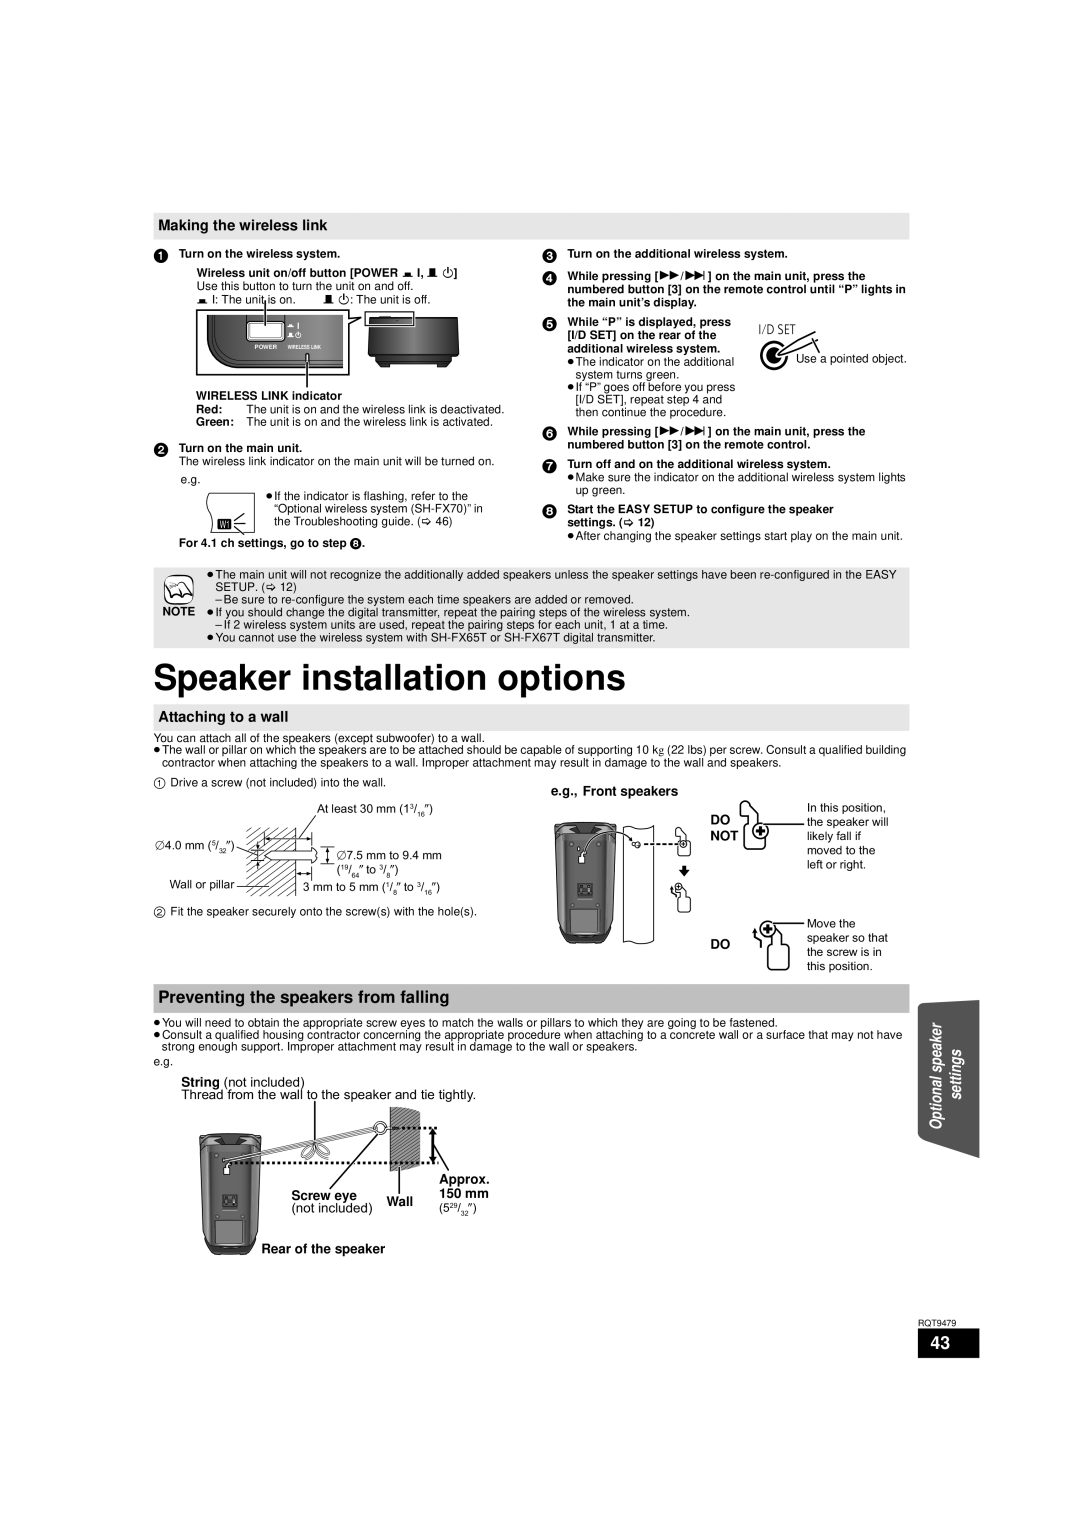 Panasonic SC-BTX70 Speaker installation options, Making the wireless link, Attaching to a wall, e.g., Front speakers, Wall 